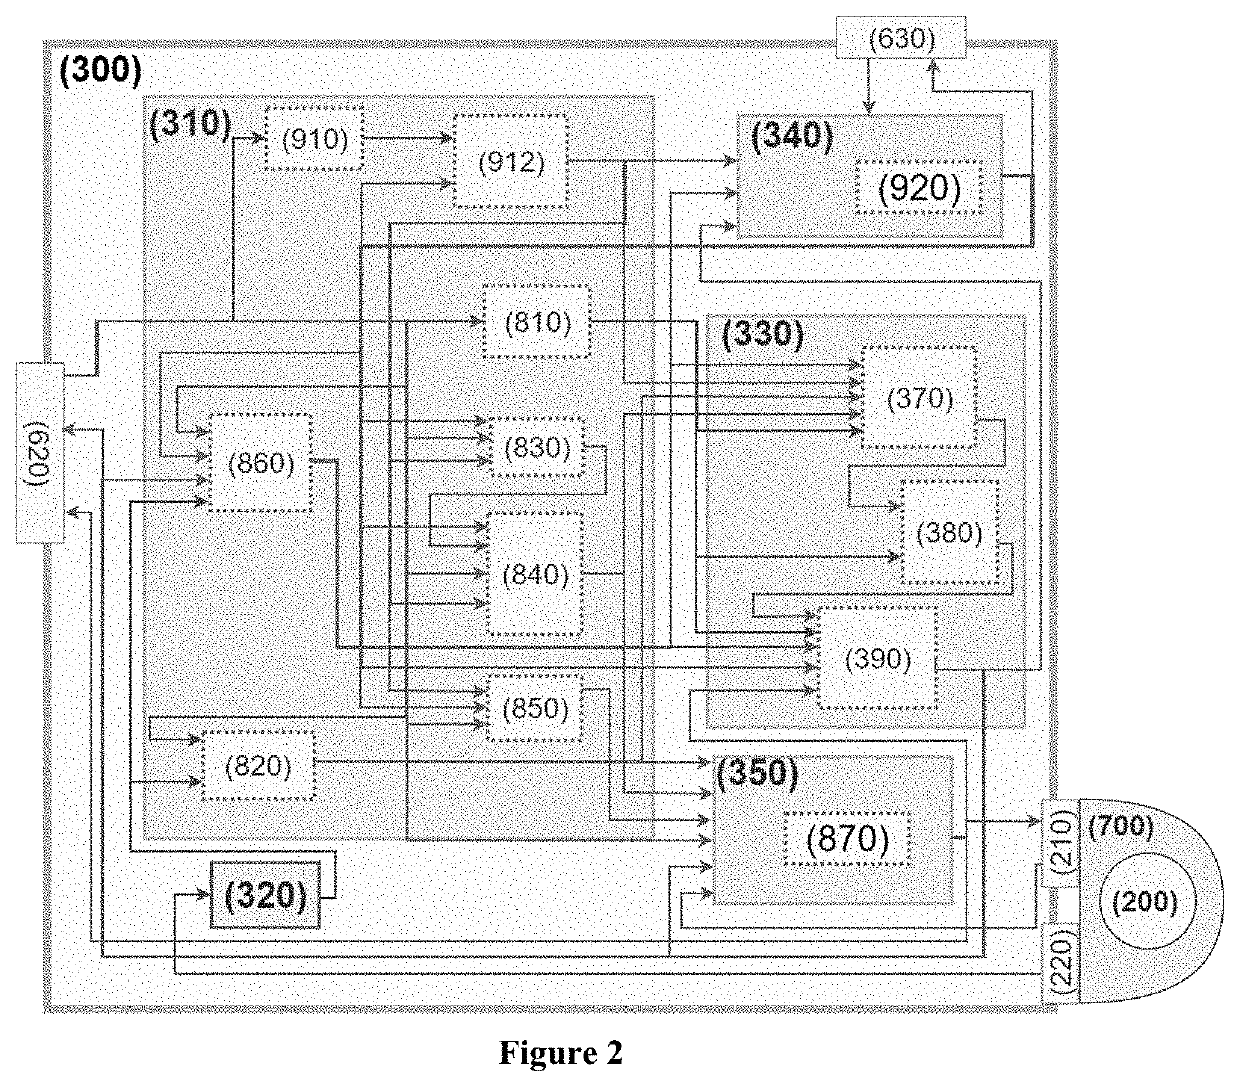 Bdi system for the cooperative and concurrent control of robotic devices